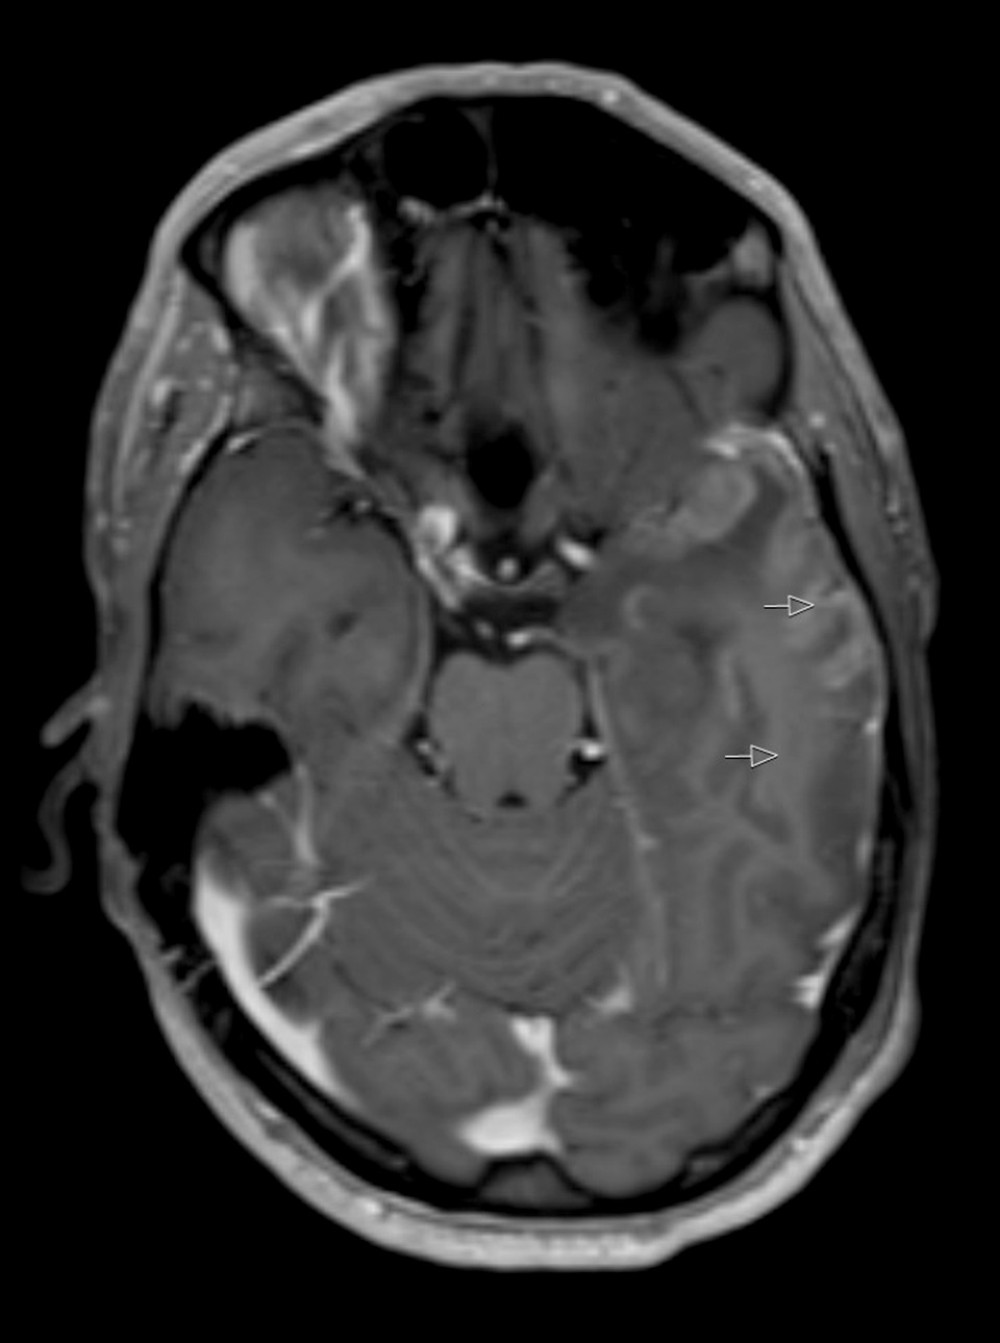 First axial contrast-enhanced T1-weighted MRI, showing hyperintense signal areas diffusely in the white matter in the left temporal lobe, with cortical contrast enhancement along the lateral and anterior-medial-basal parts of the left temporal lobe (arrows). Similar but less prominent changes are seen in the right temporal lobe. The interruption of the anatomical continuity of the lateral aspect of the right temporal lobe is an artifact.